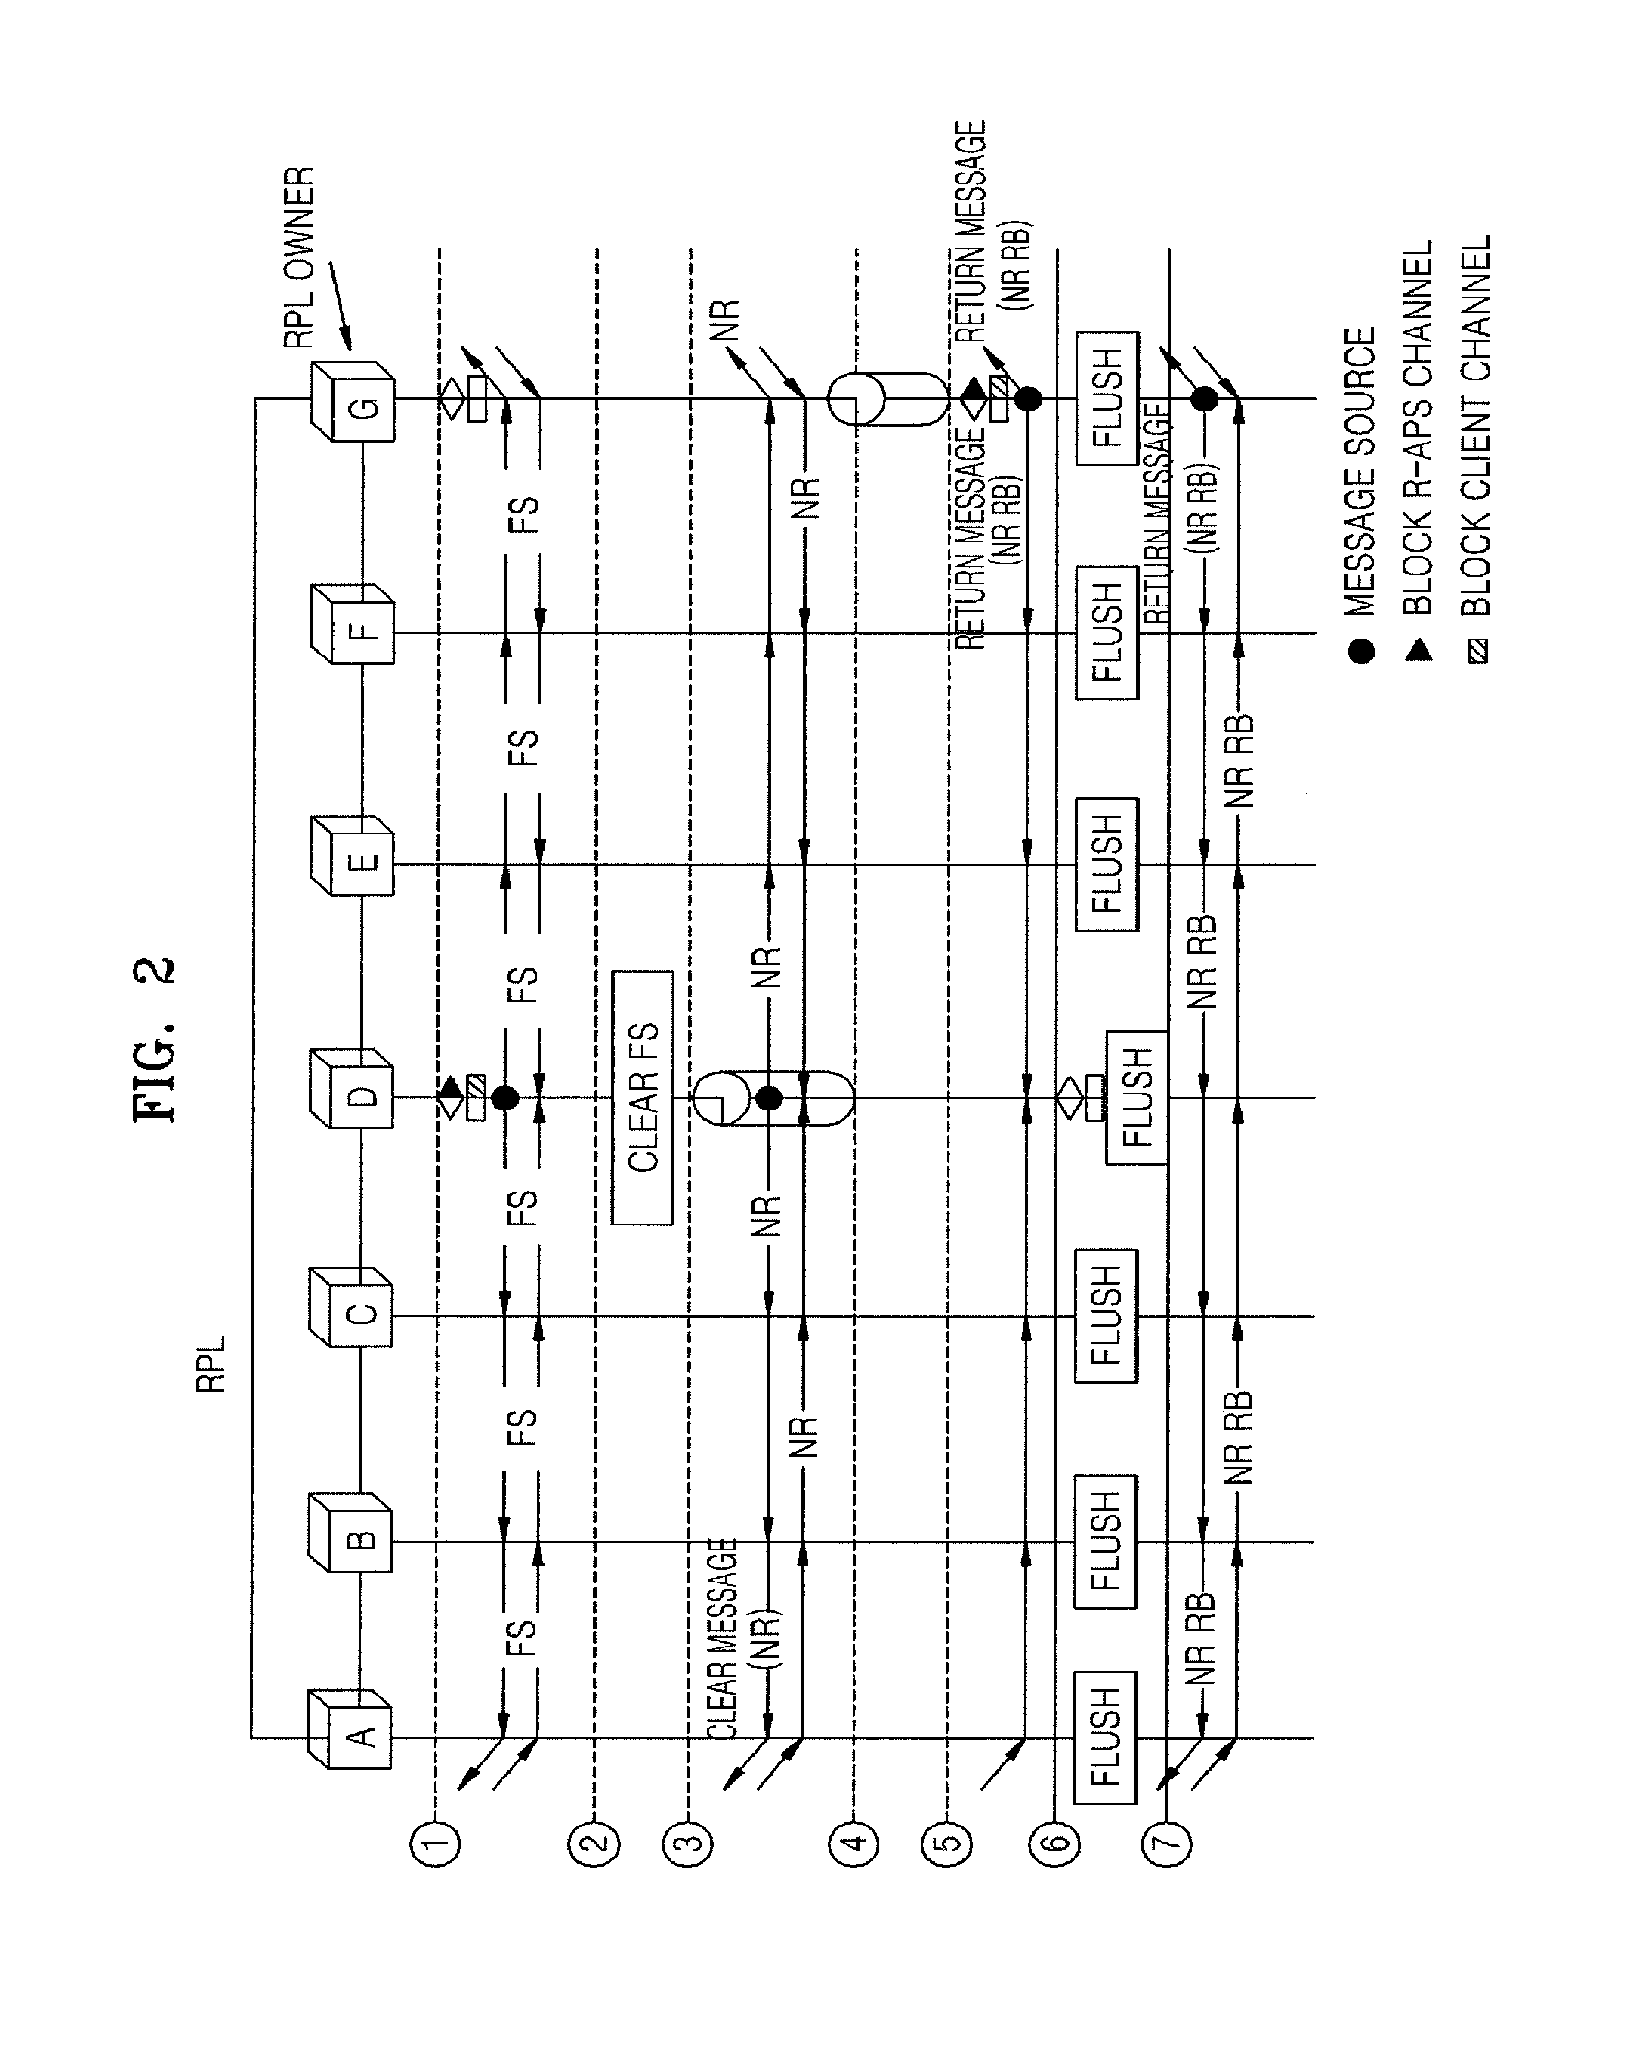 Force protection switching method in ethernet ring network